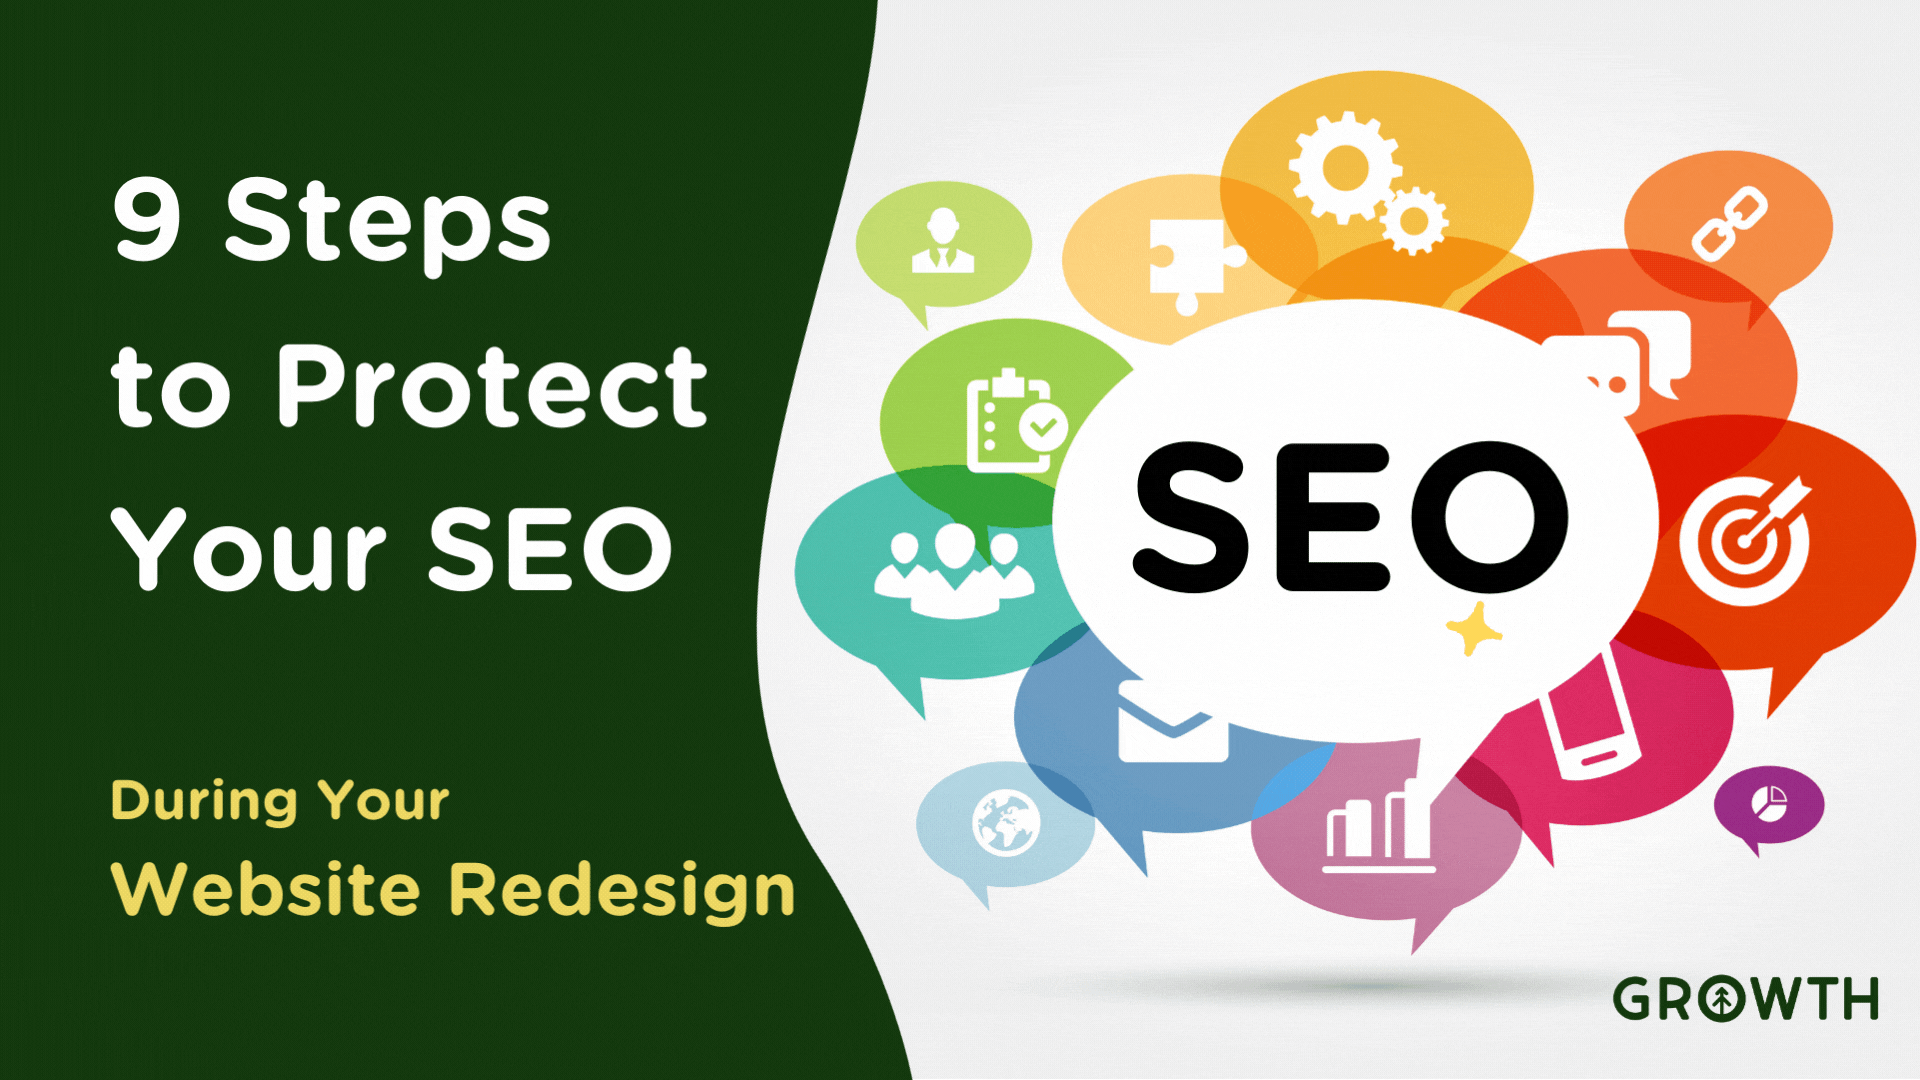 9 Steps to Protect SEO during a Website Redesign